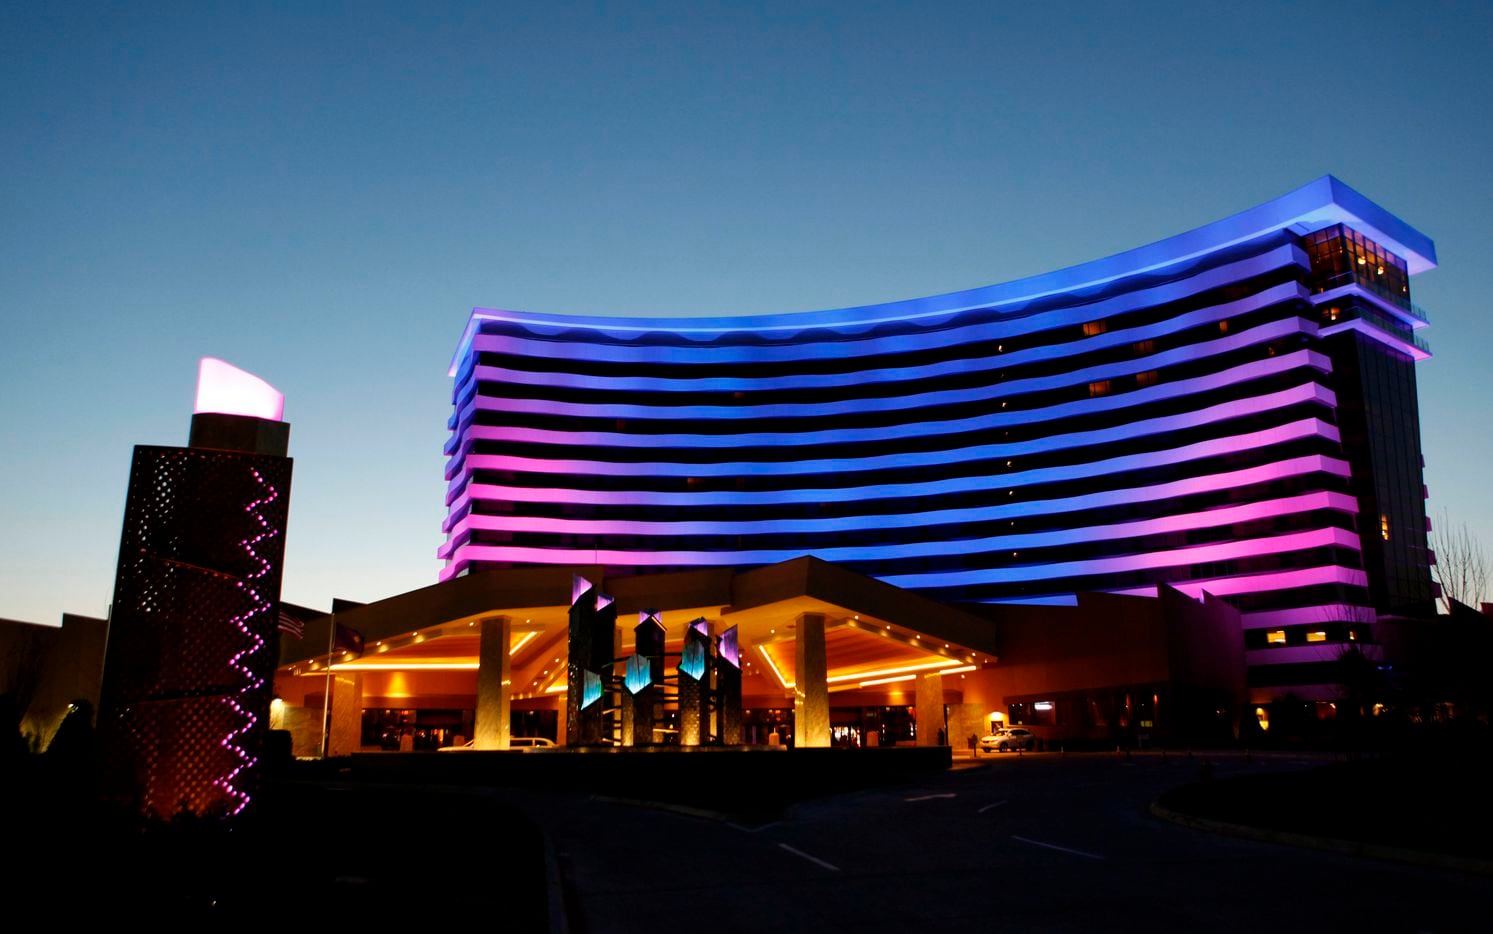 The Choctaw Casino Resort in Durant, Okla. is already a standout along U.S. 75 north of...